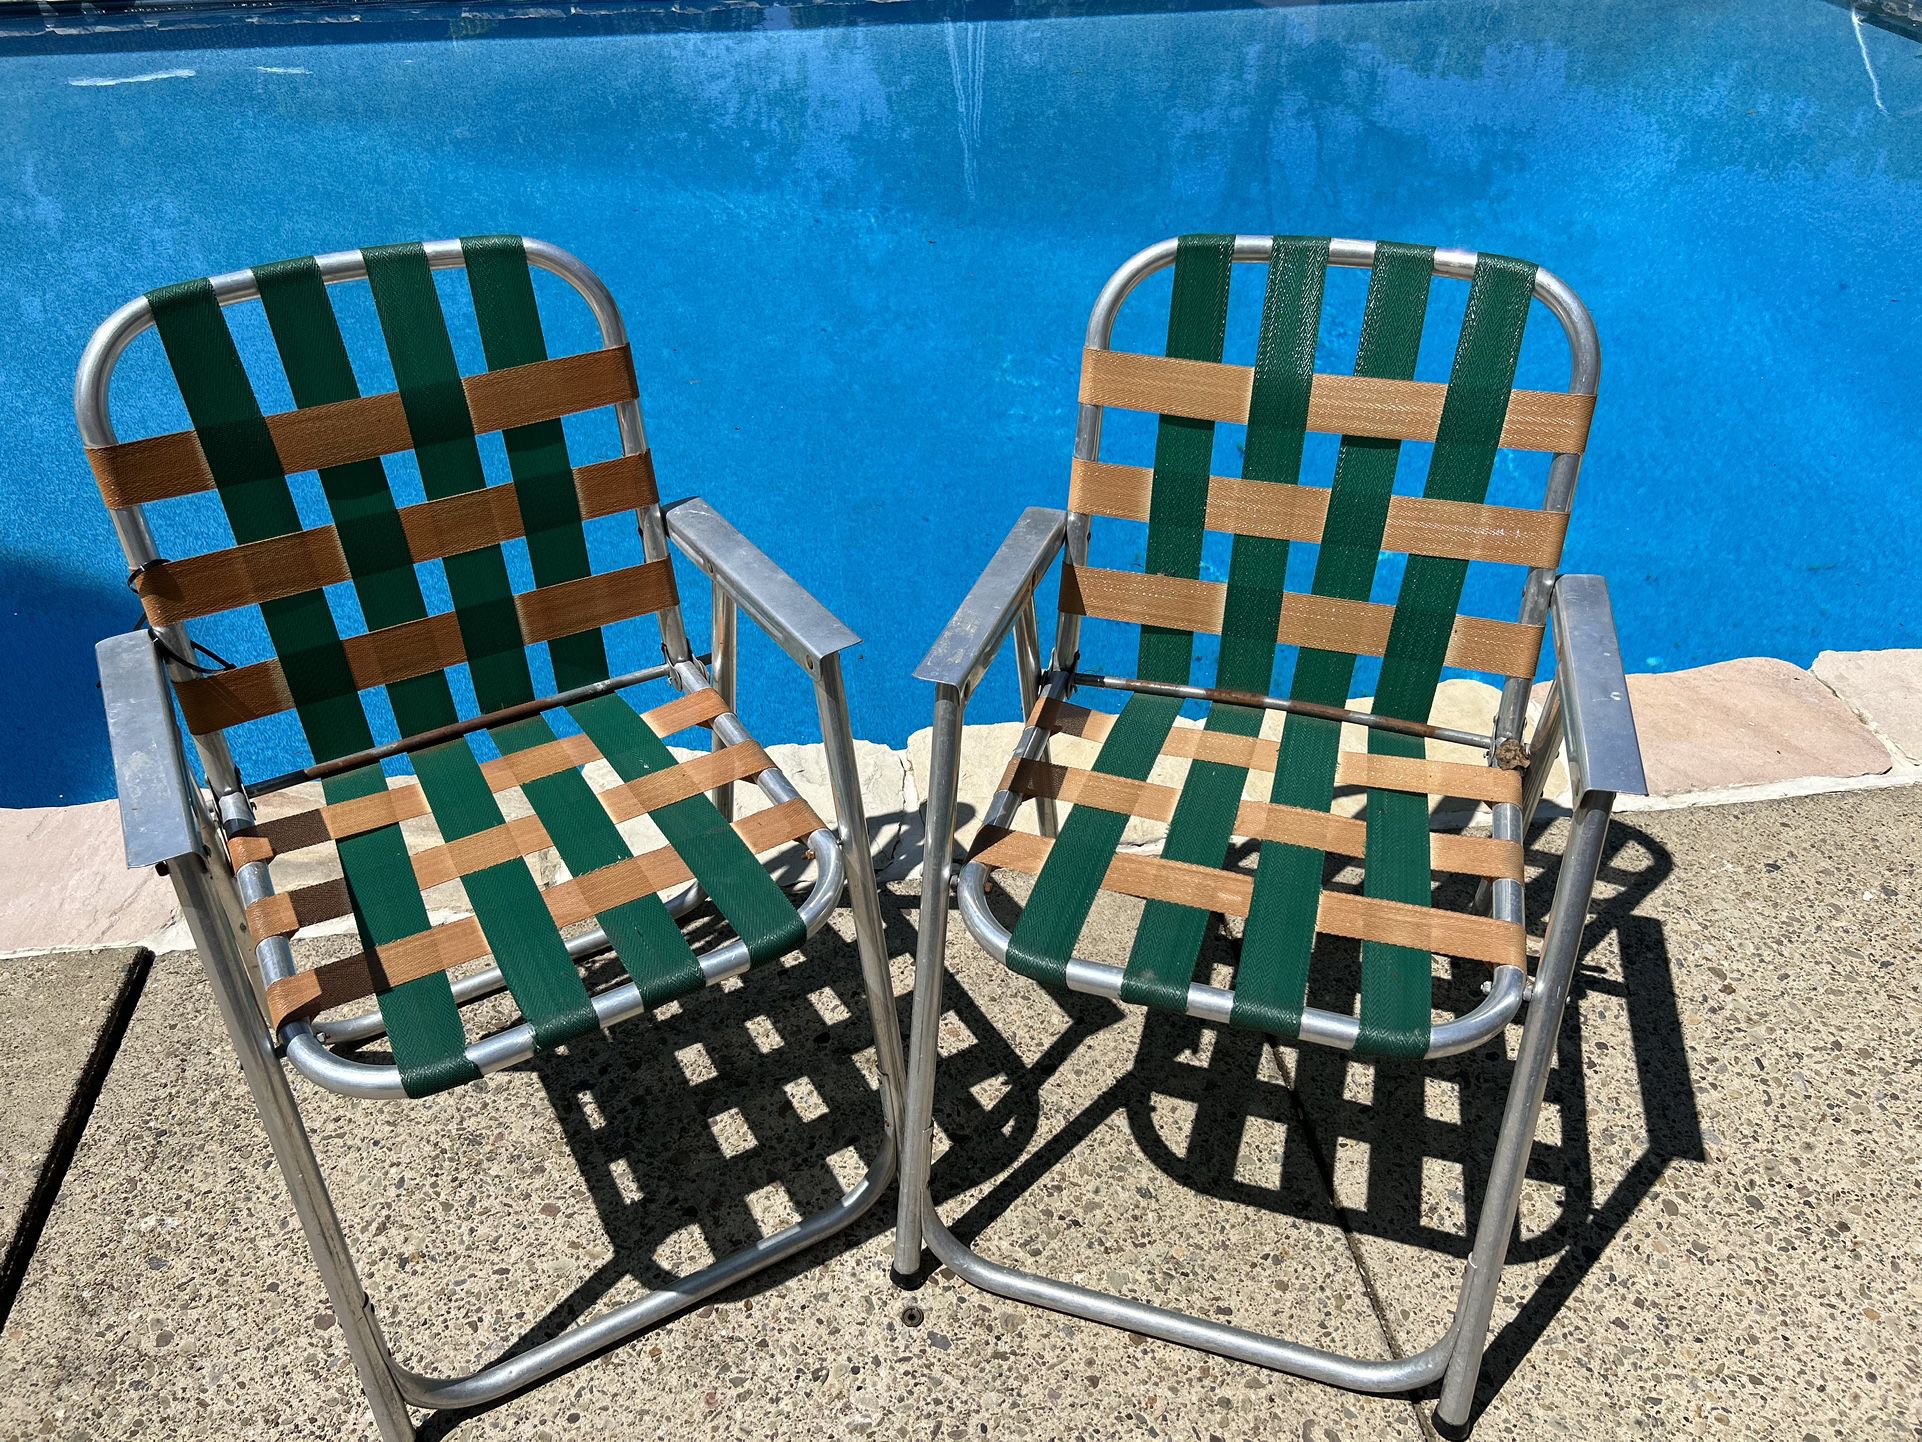  Vintage Strap Chairs